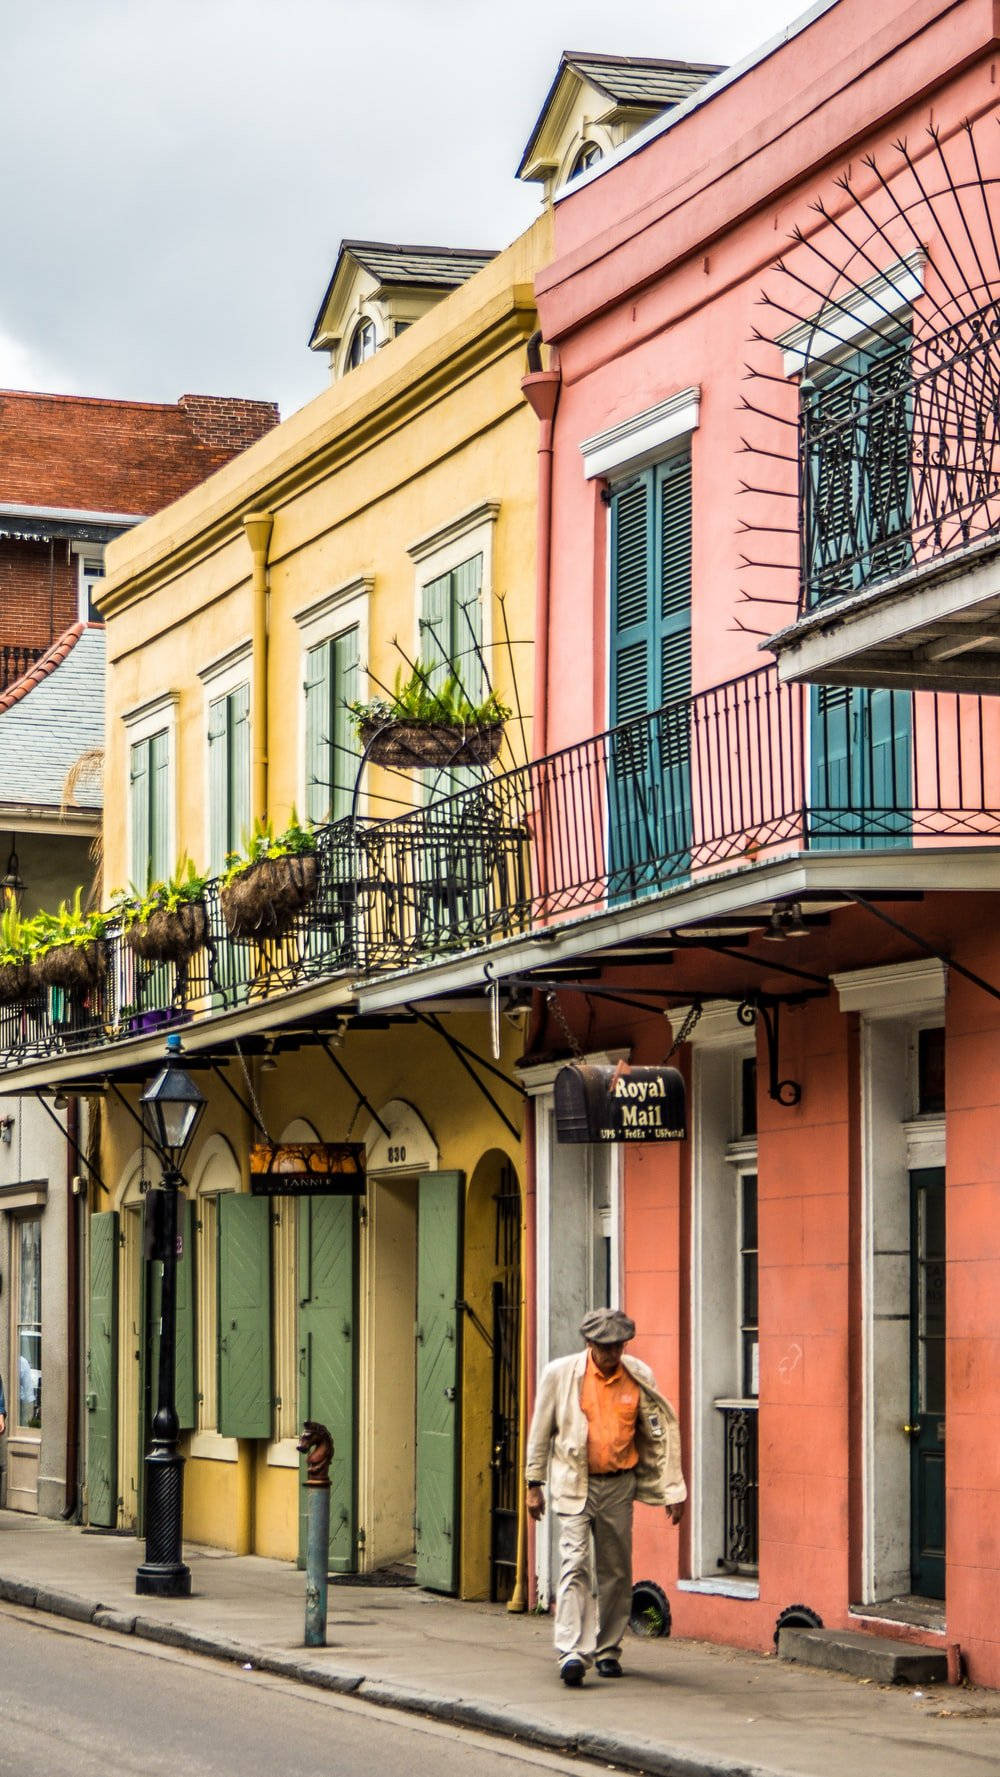 Caption: A Captivating Glimpse Of A Rustic Sidewalk In The Historic French Quarter.